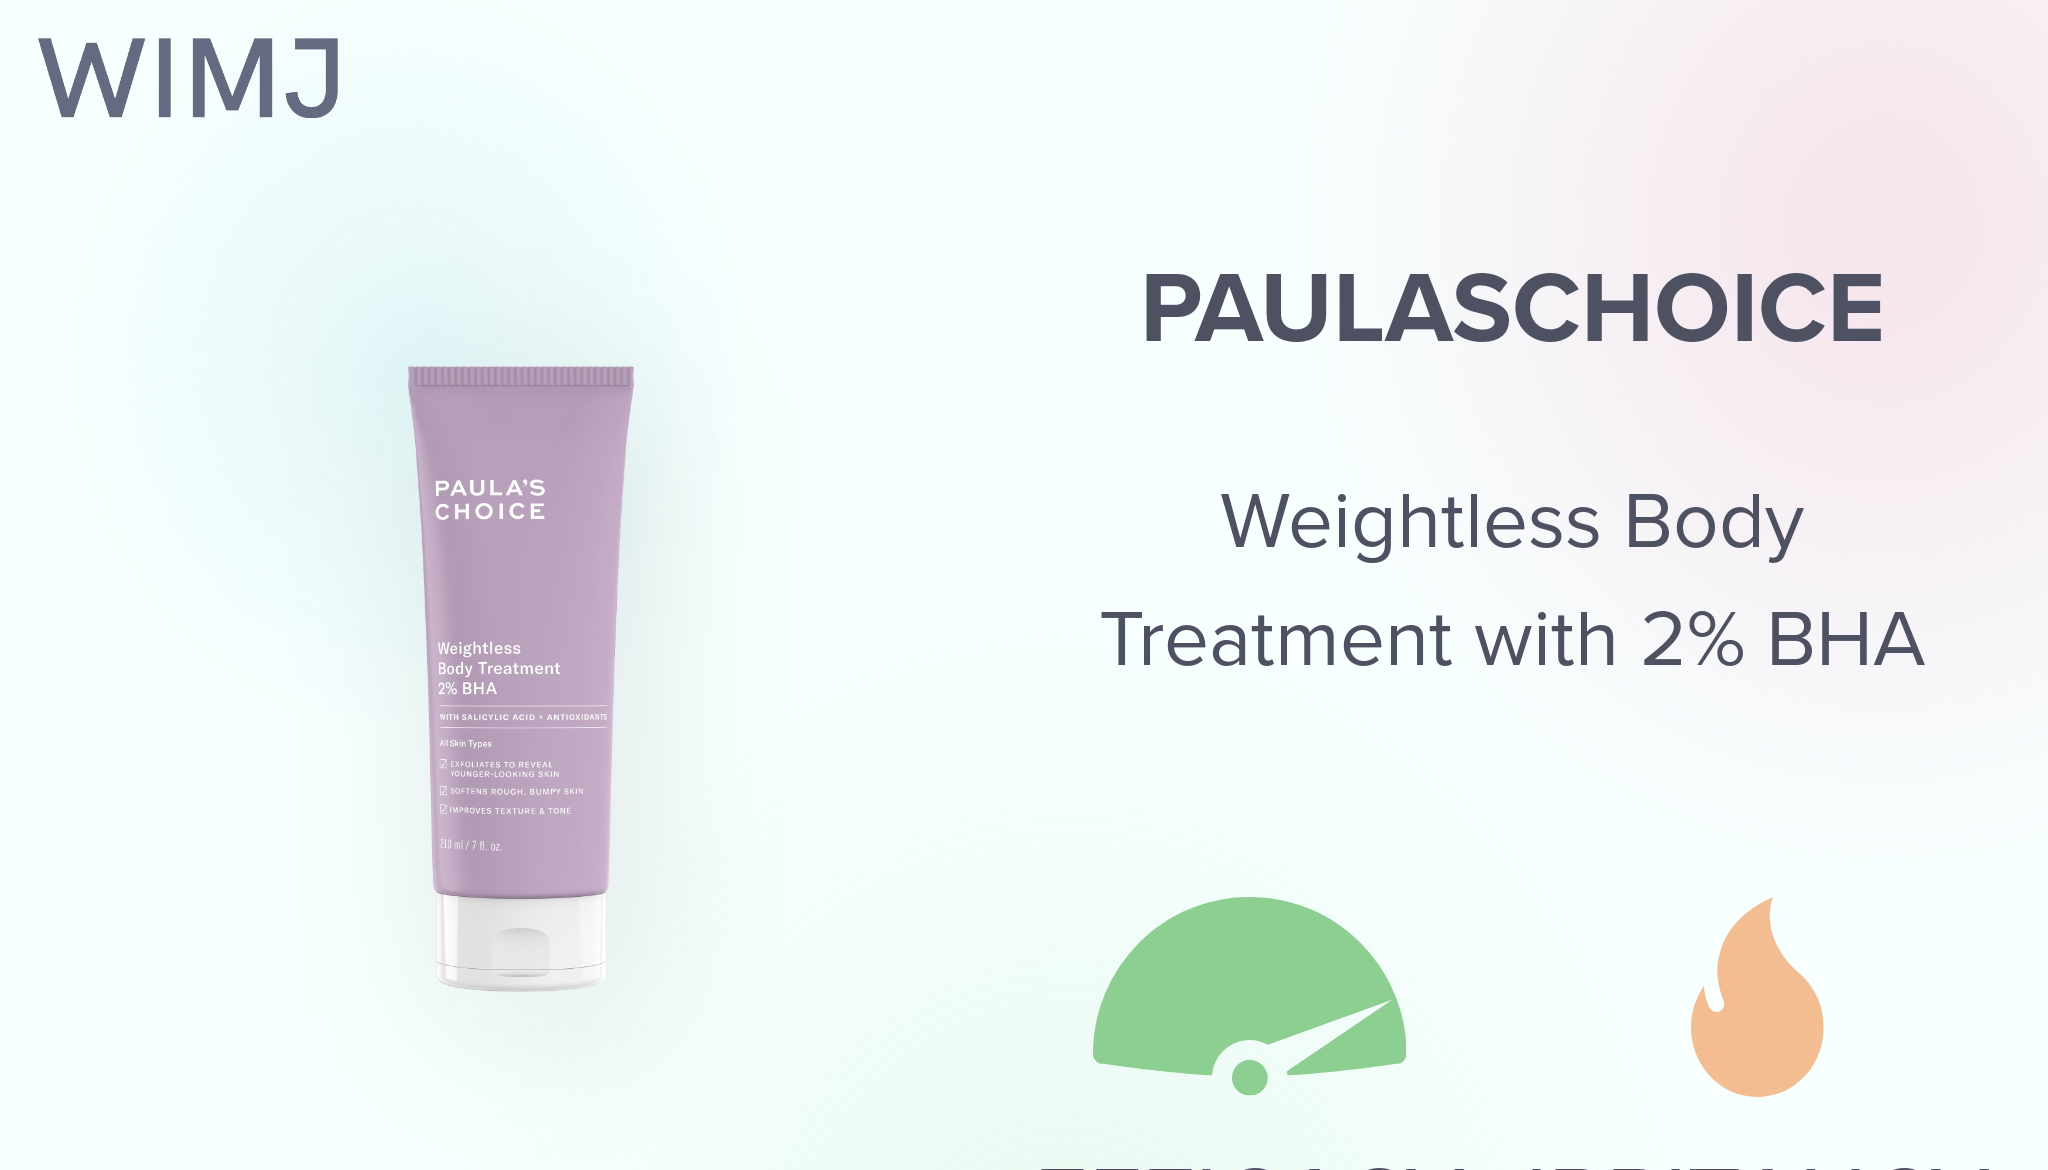 Review: Paulaschoice - Weightless Body Treatment with 2% BHA